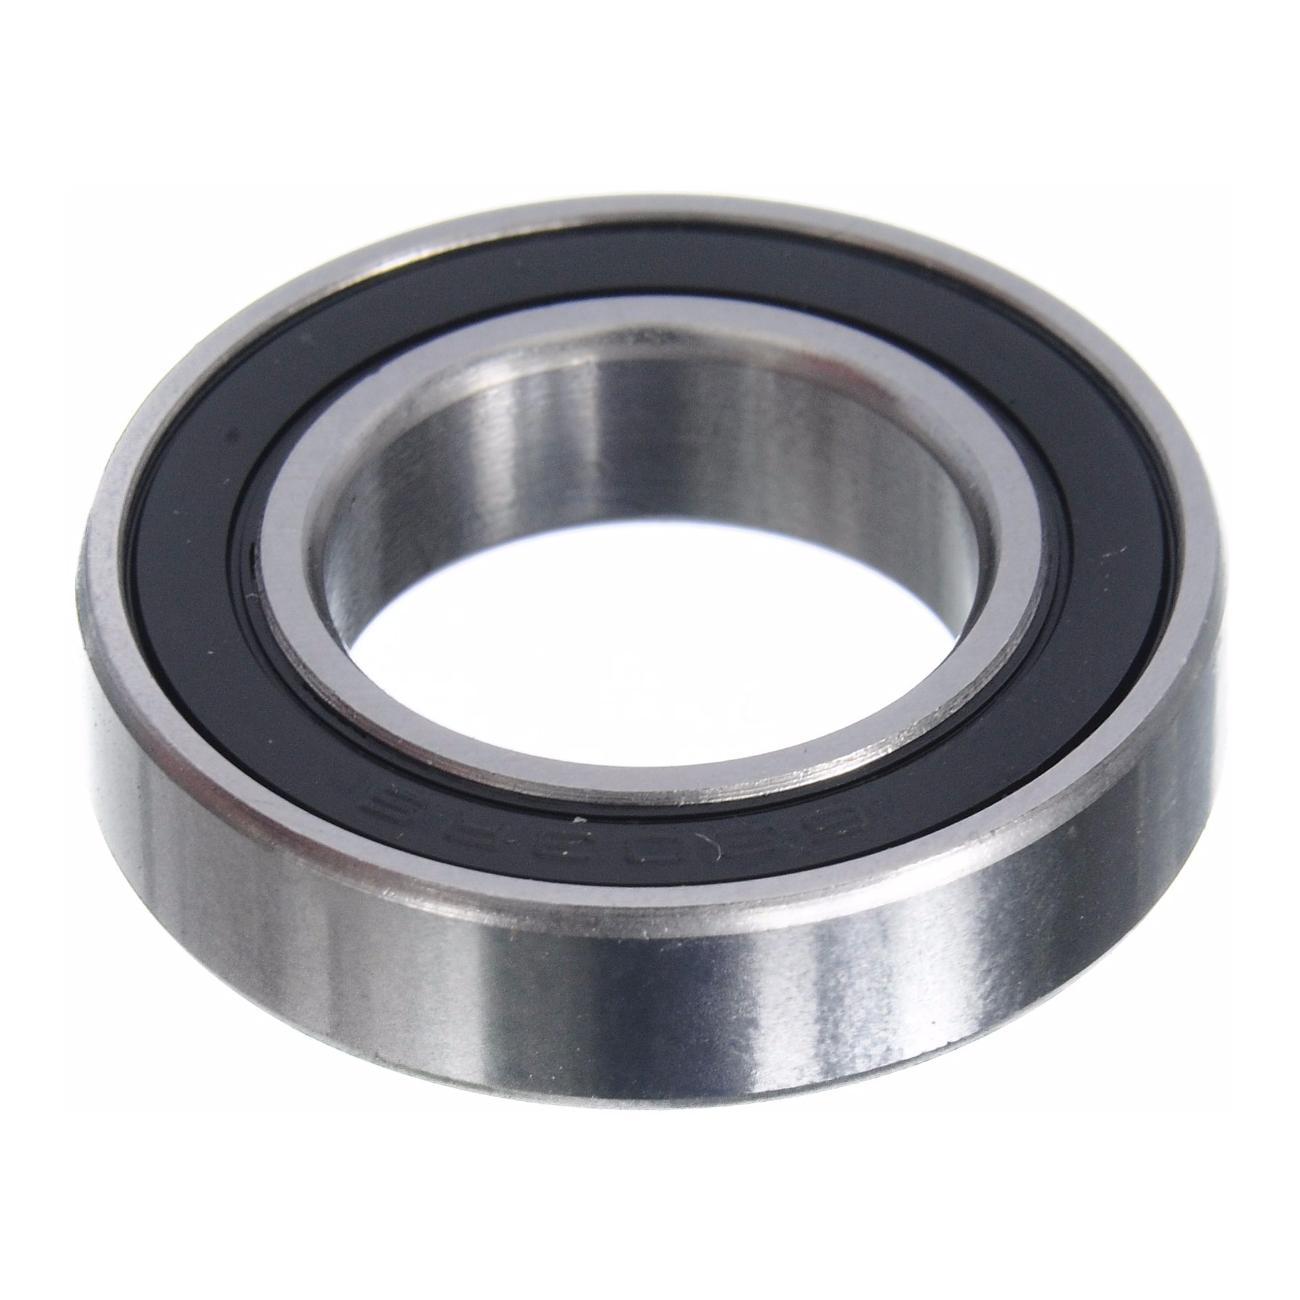 Brand-x Sealed Bearing - 6903 (2rs)  Silver